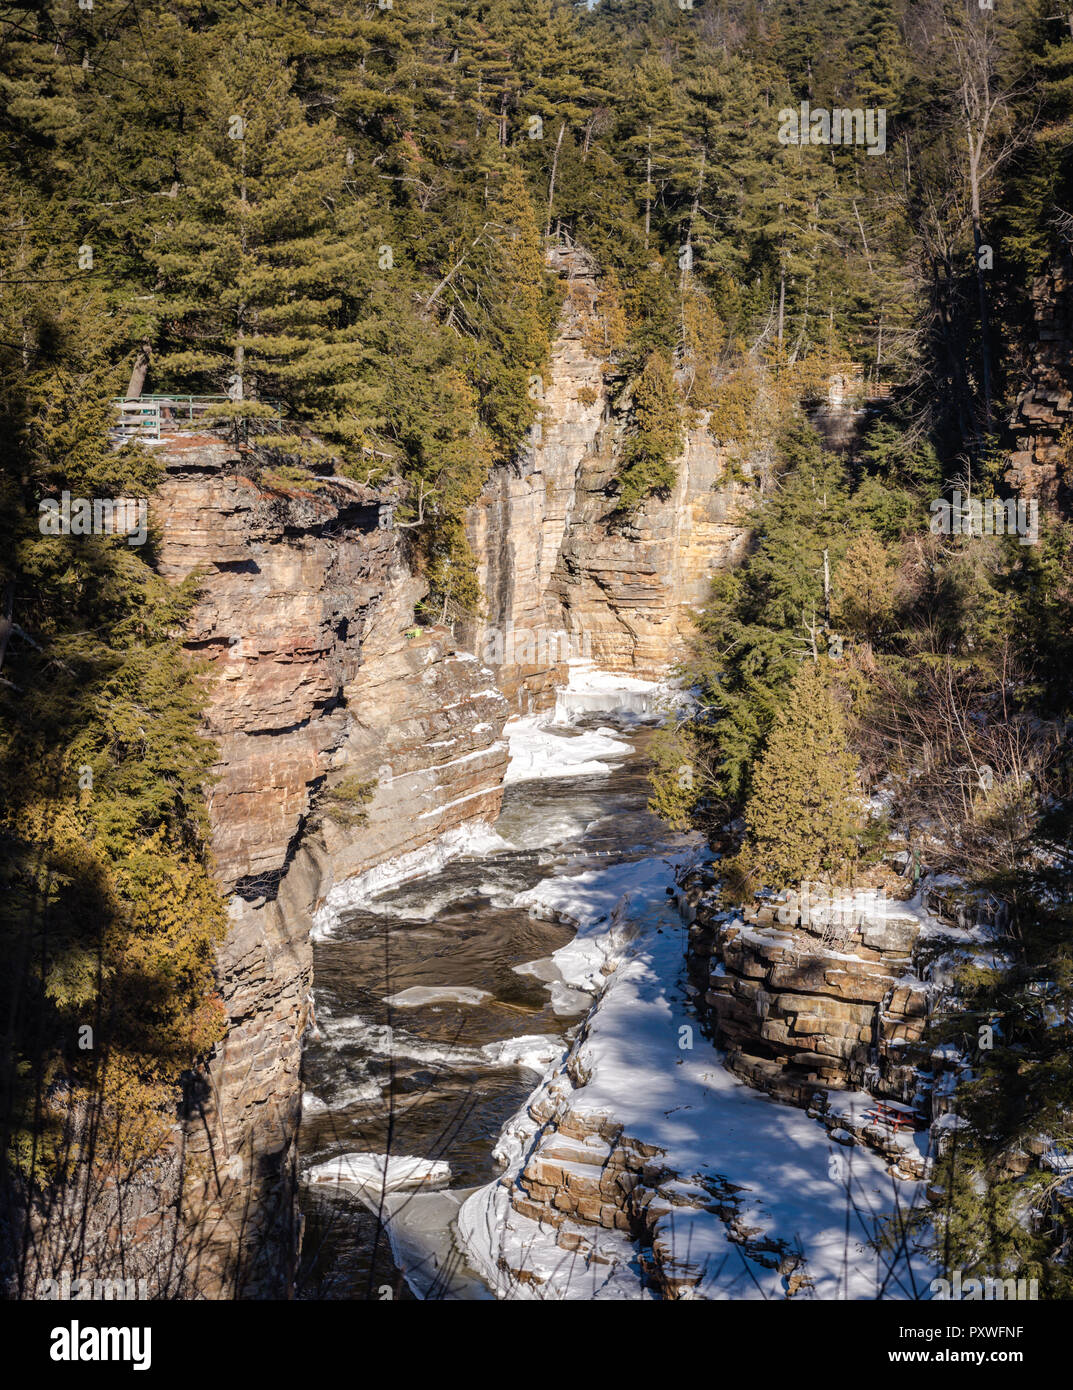 Ausable Chasm is a sandstone gorge and tourist attraction located near the hamlet of Keeseville, New York, United States. Stock Photo